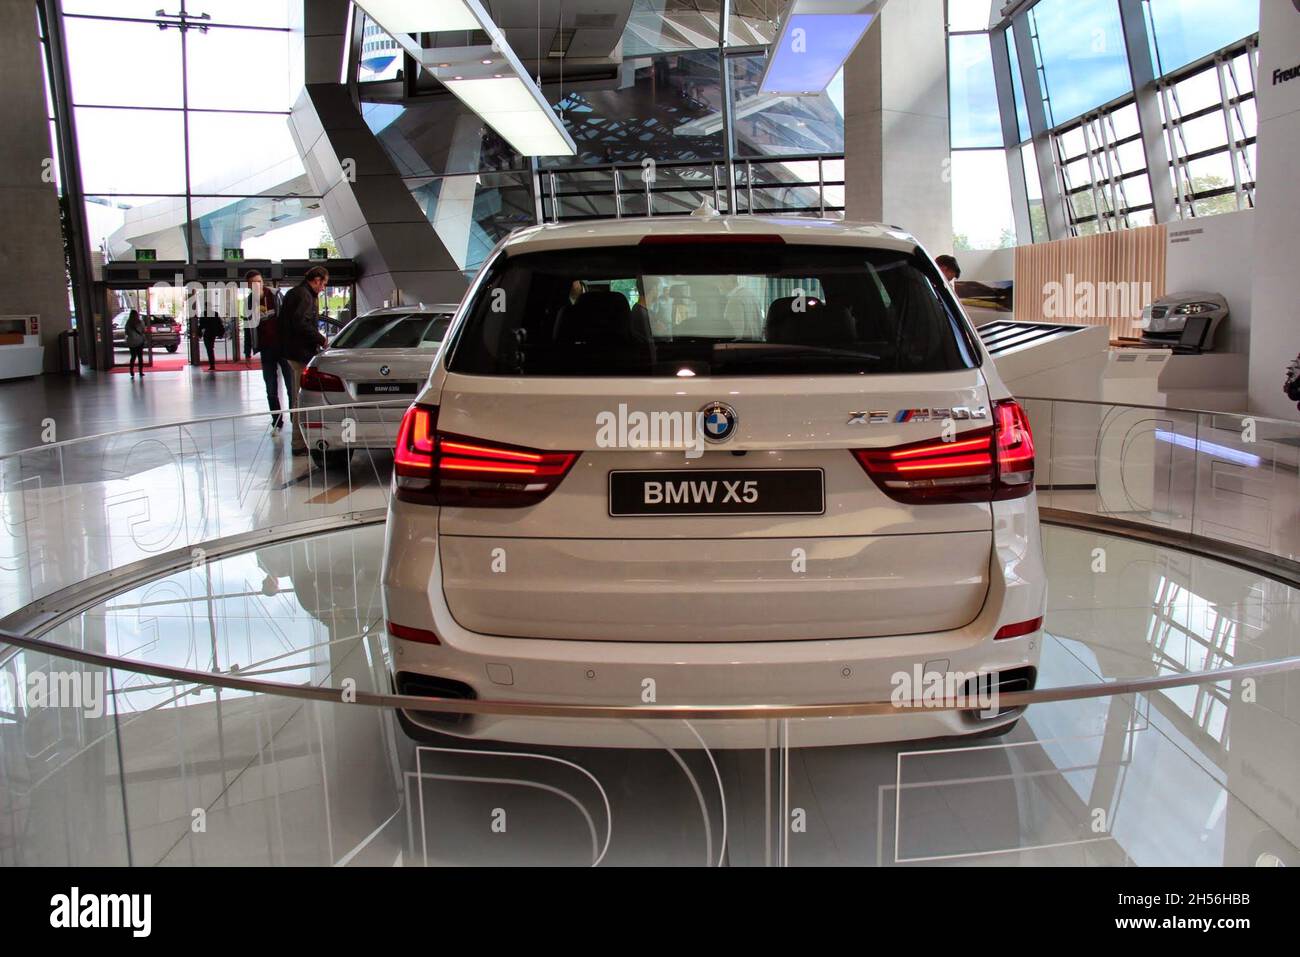 BMW X5, M50D version, white color. Launched at the 2013 Frankfurt International Motor Show. BMW Museum: Welt - Munich - Germany . Stock Photo